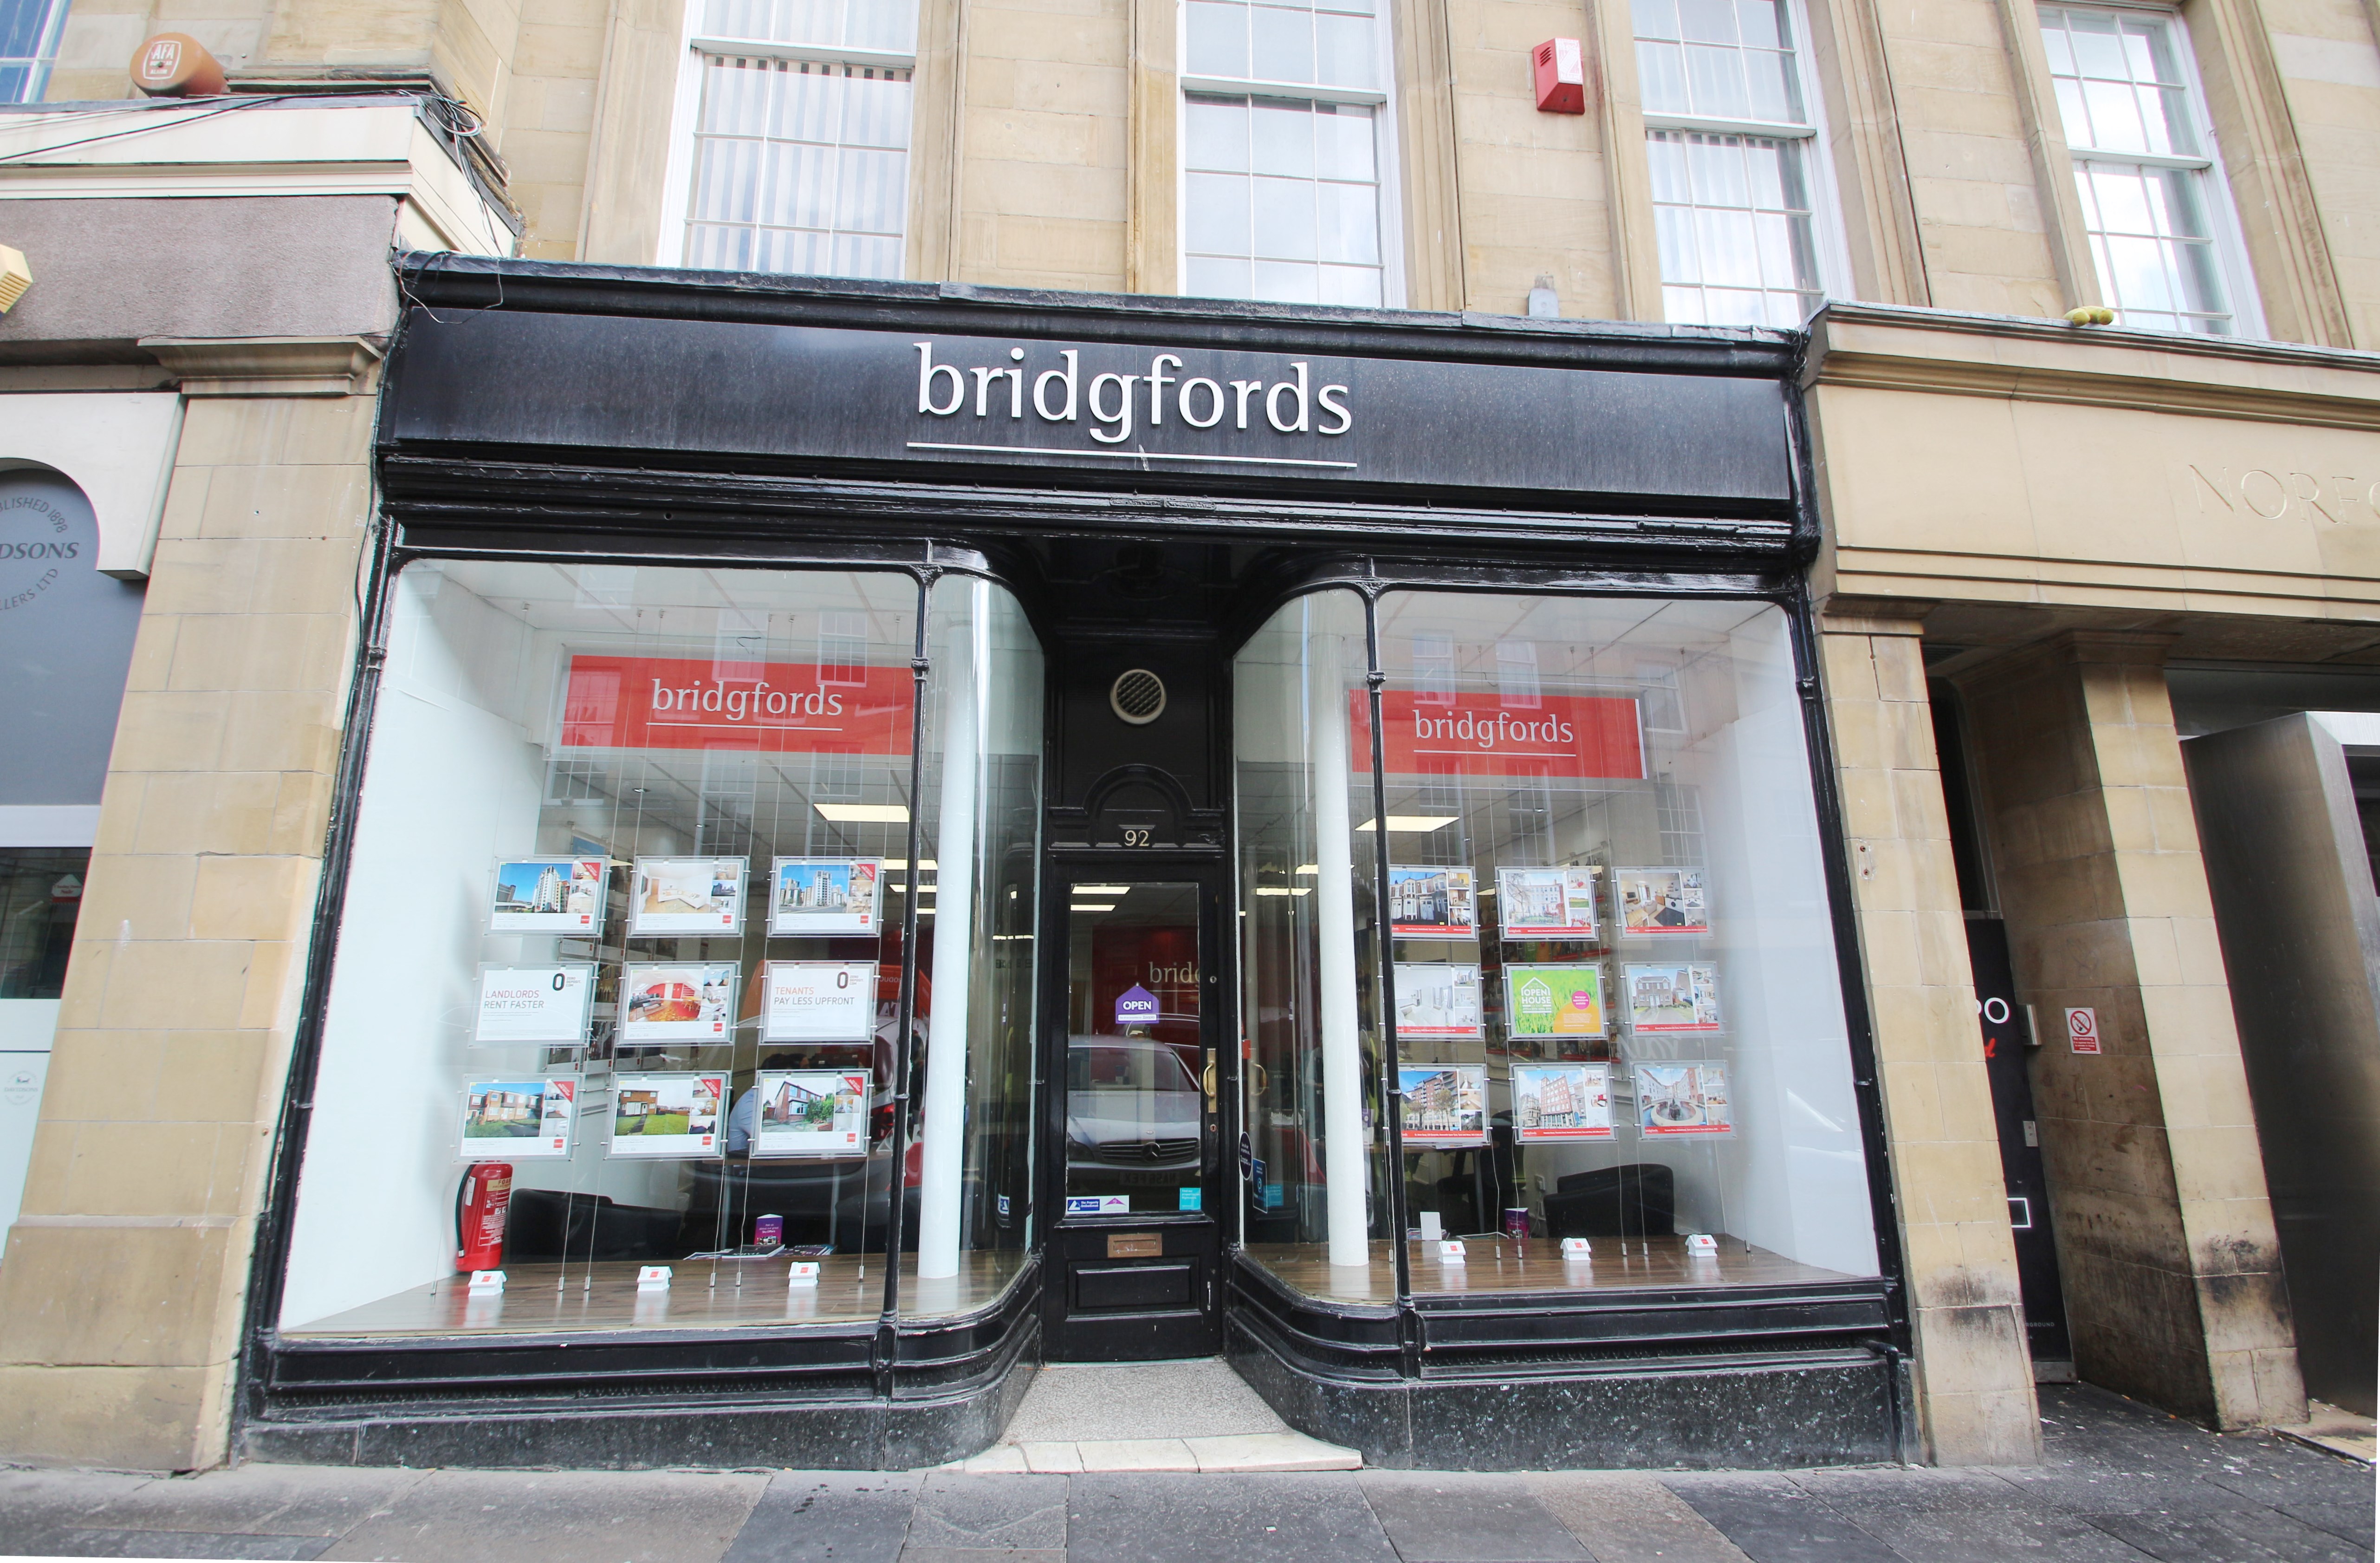 Images Bridgfords Letting Agents Newcastle